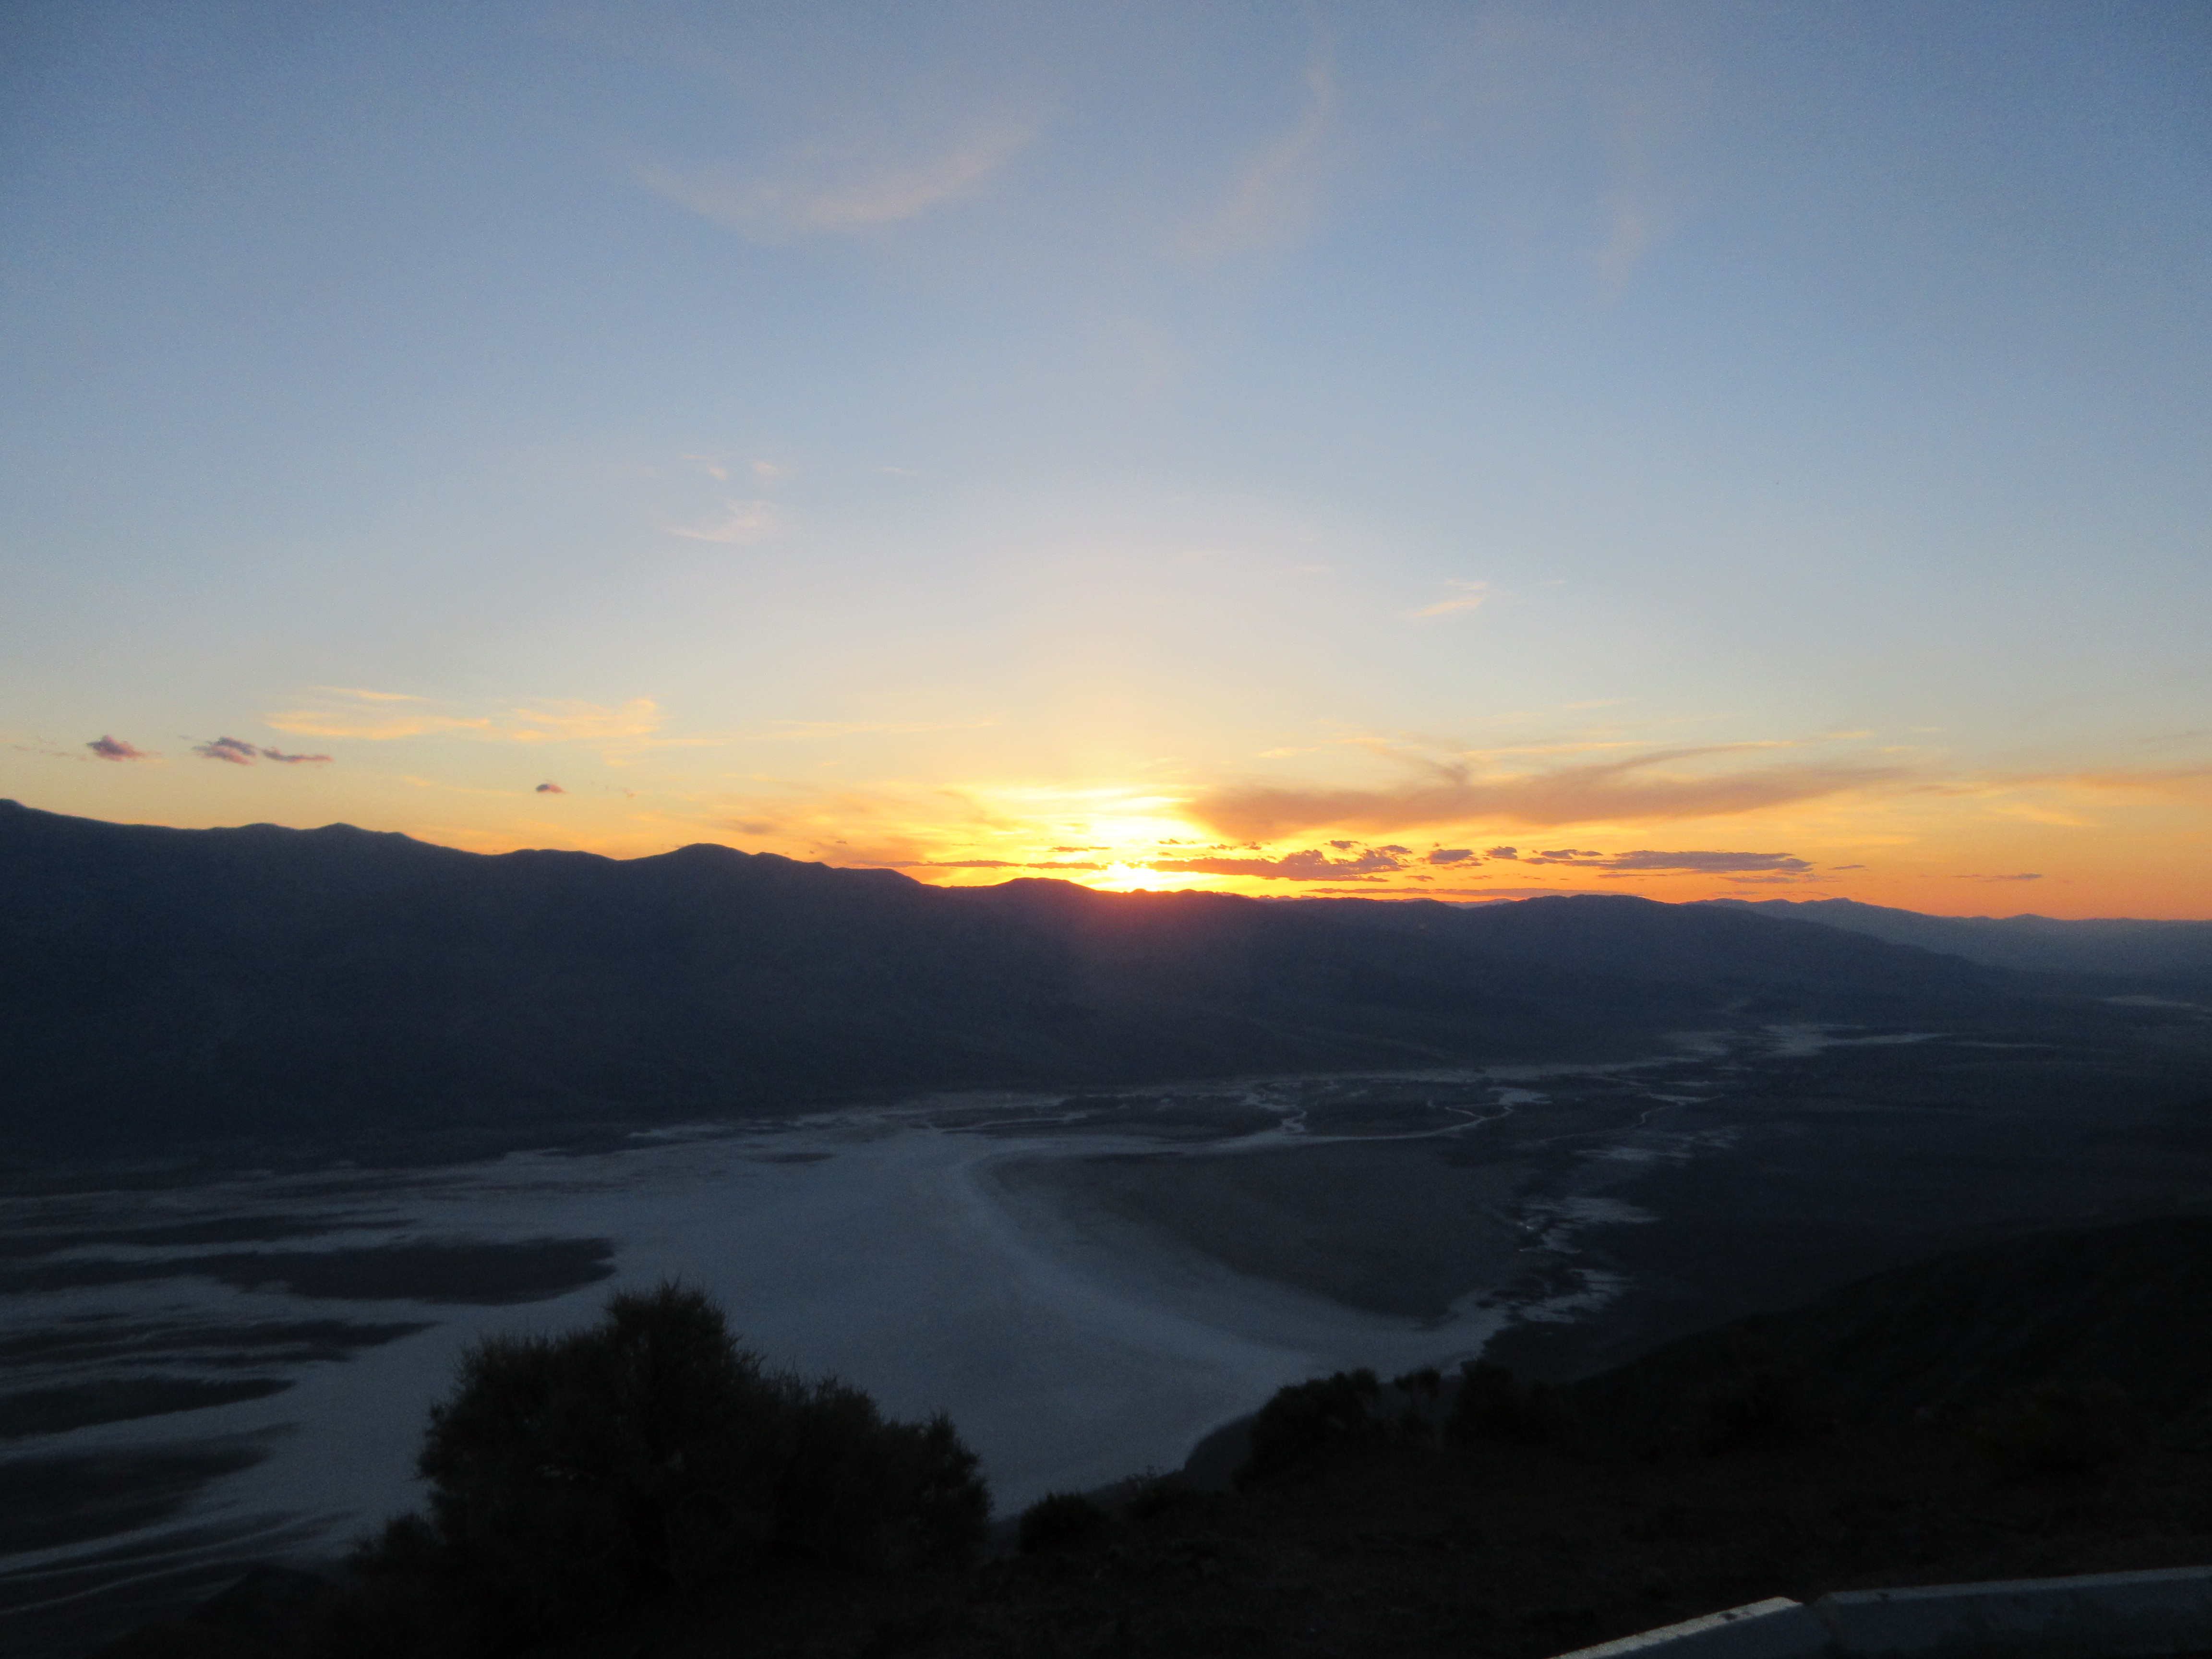 Sunset over the Paramint Mountains and Death Valley.